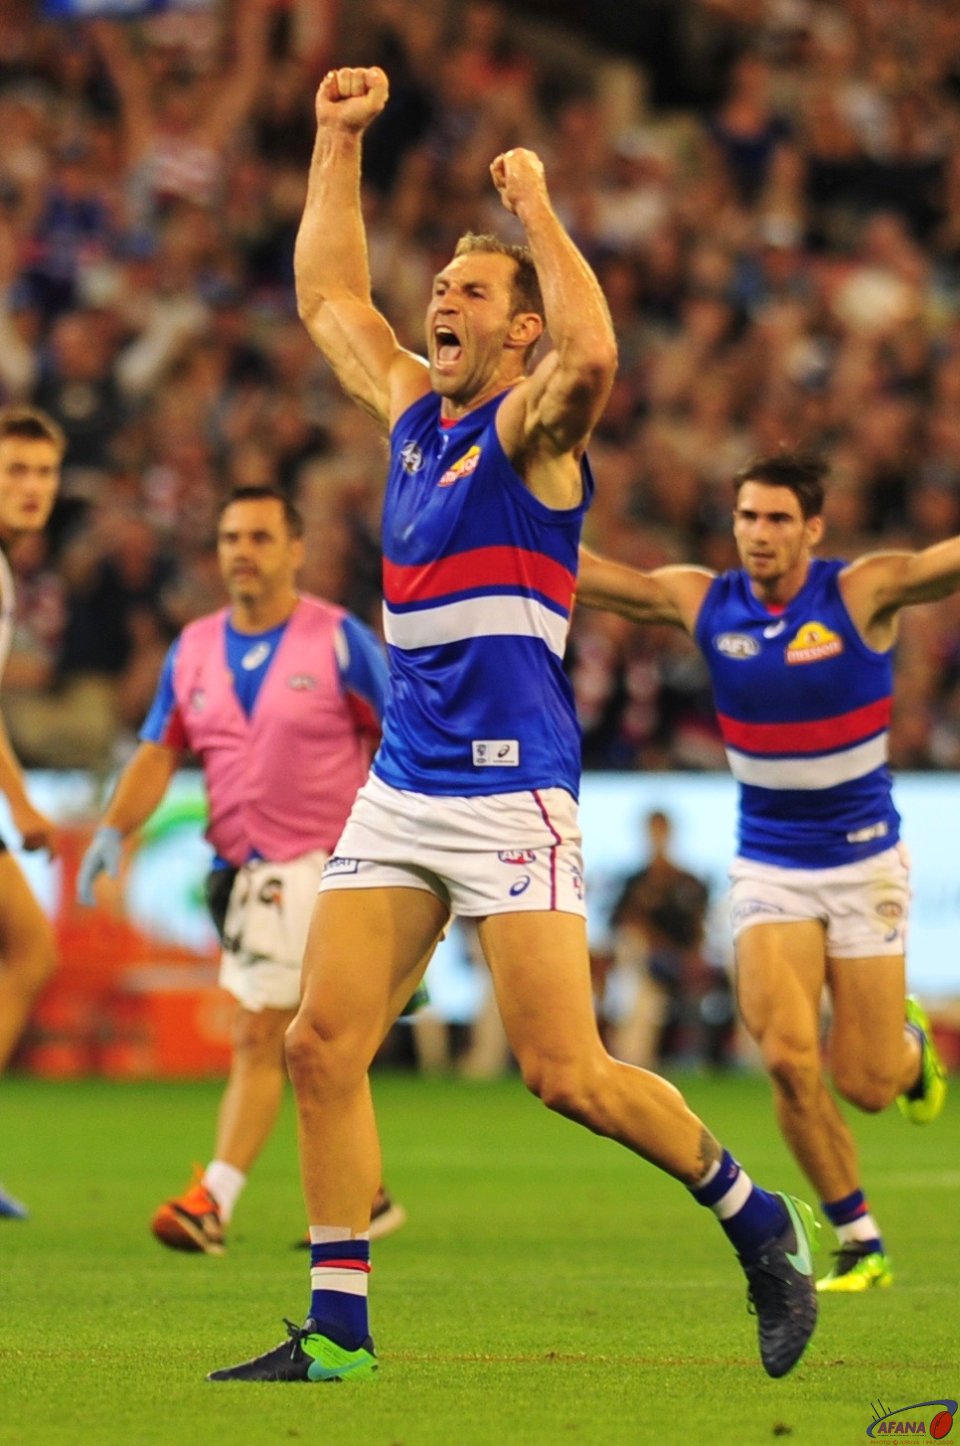 The raw emotion after a goal as Travis Cloke celebrates